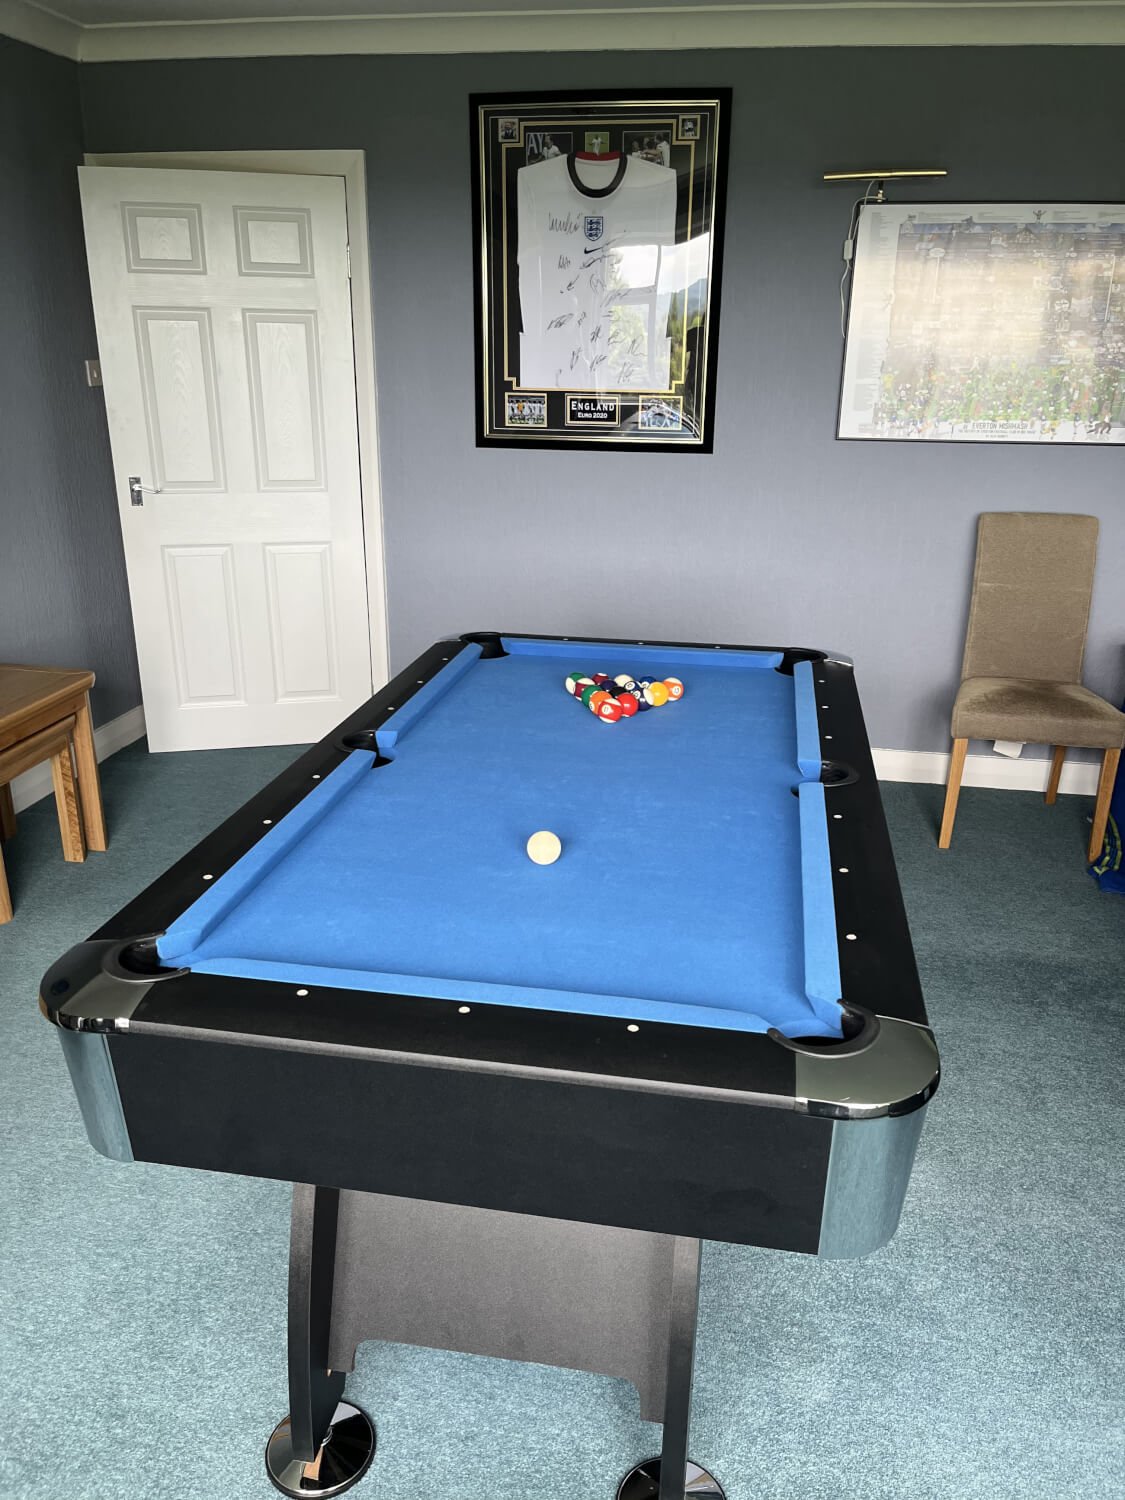 Strikeworth Pro American Deluxe 6ft Pool Table Review Image 798 1500px 